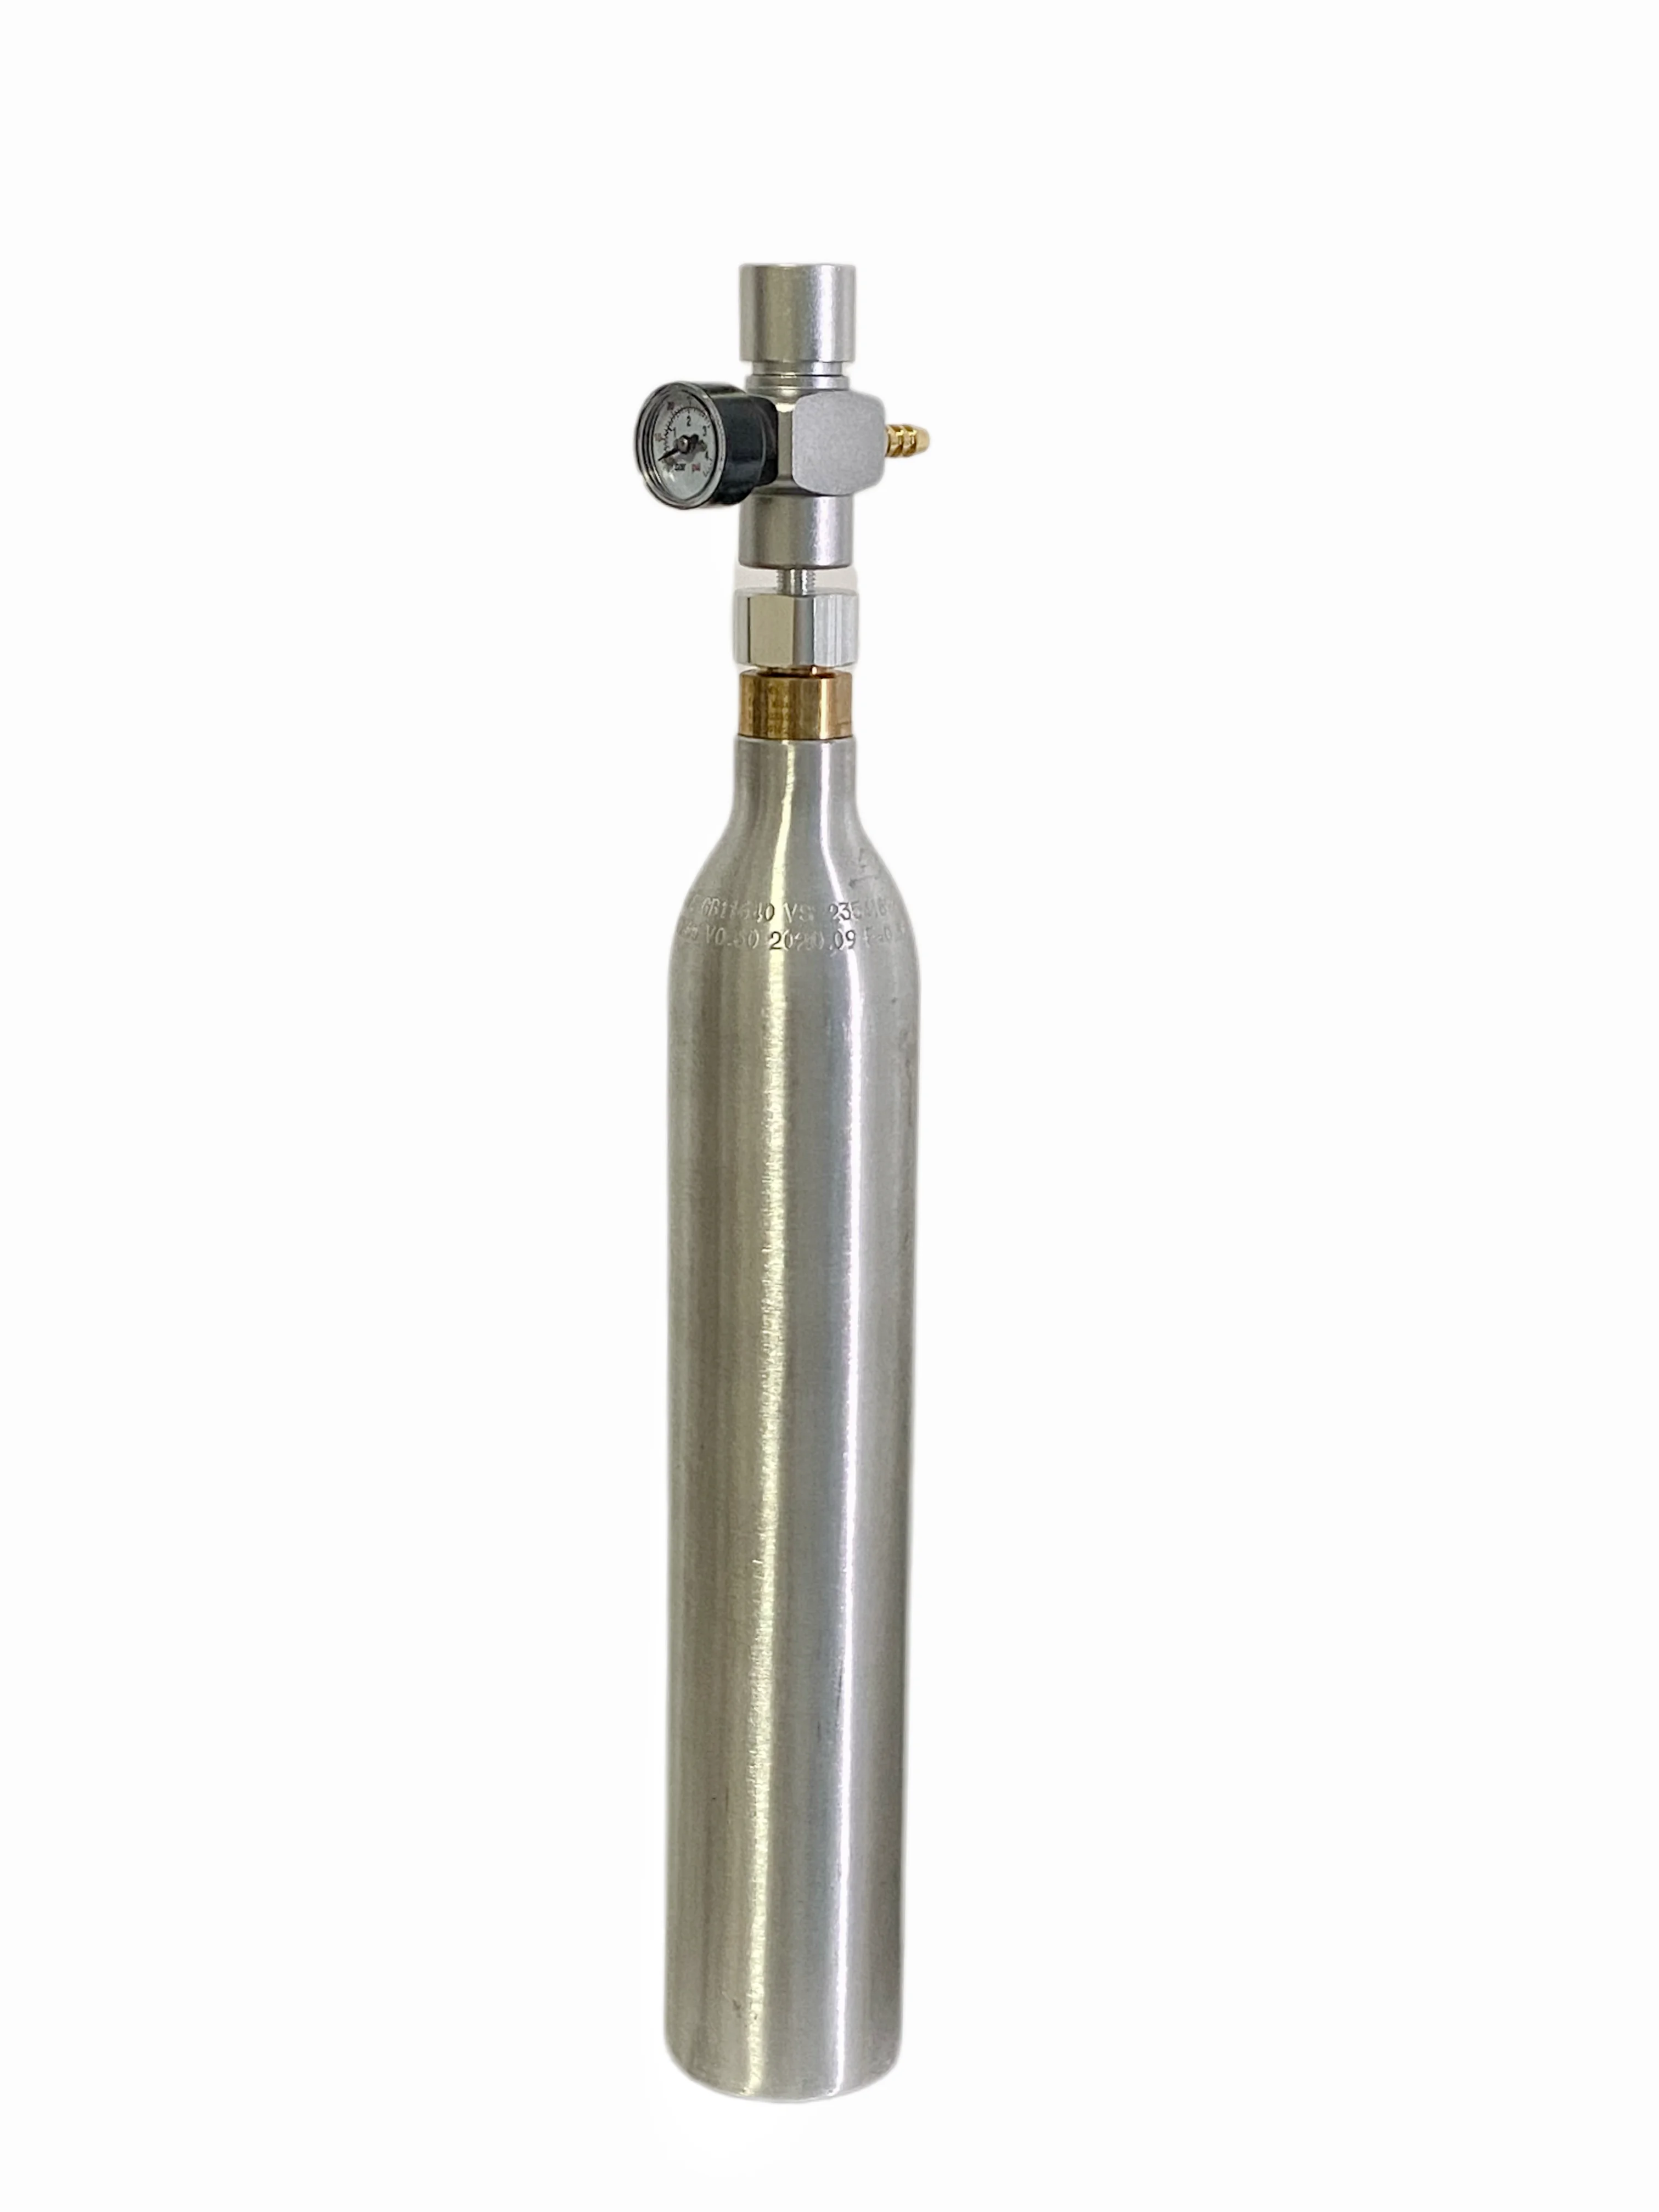 

Co2 Dispenser Kit (0.6L Sodastream Cylinder & Co2 Keg Charger & TR21*4 To 3/8-24UNF Convert Adapter ) For Beer Home Brewing